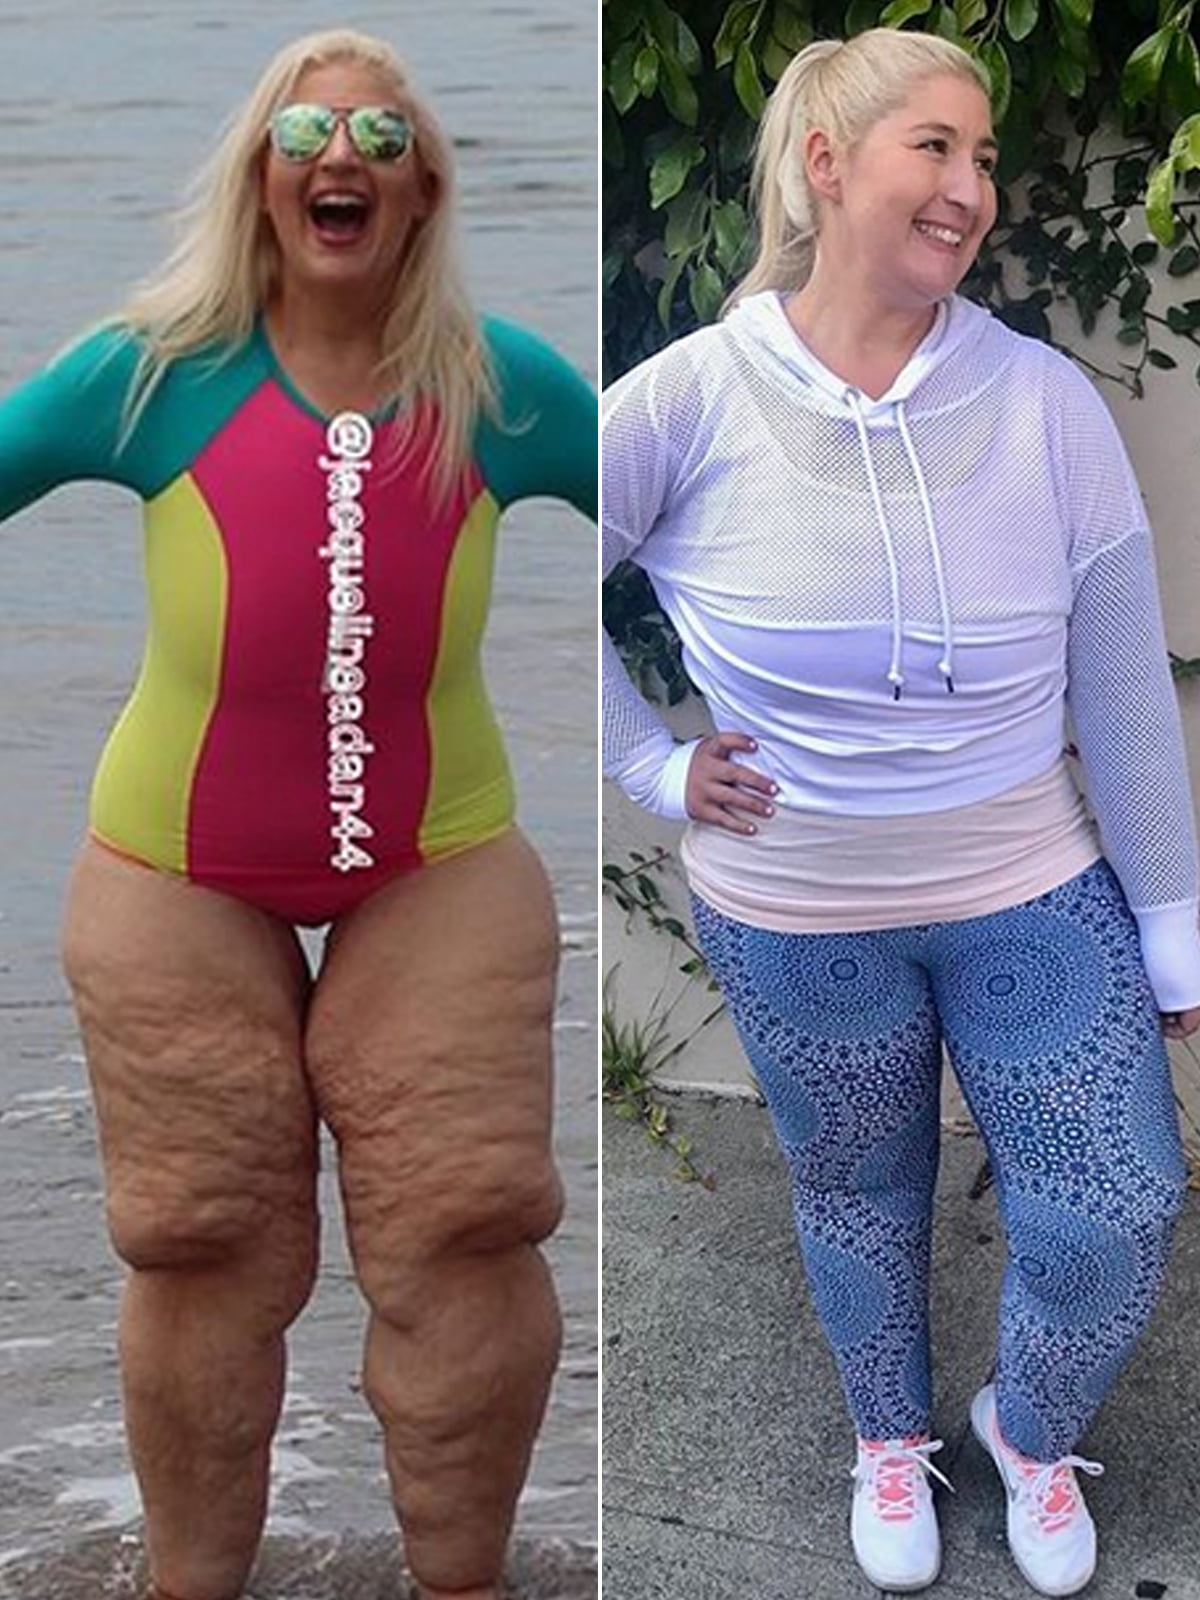 Woman Who Lost 350 Lbs. 